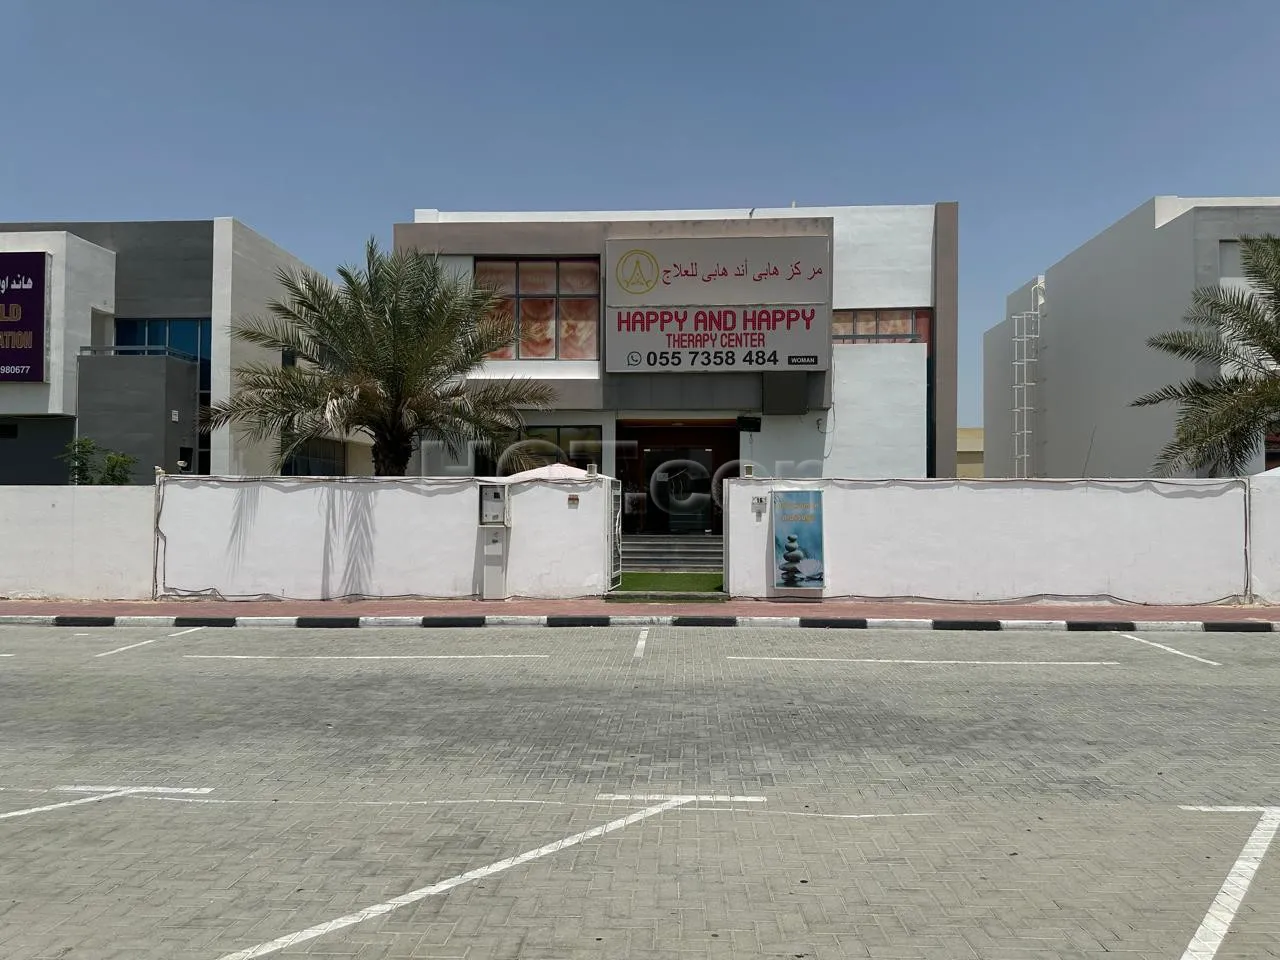 Ajman City, United Arab Emirates Happy and Happy Therapy Center